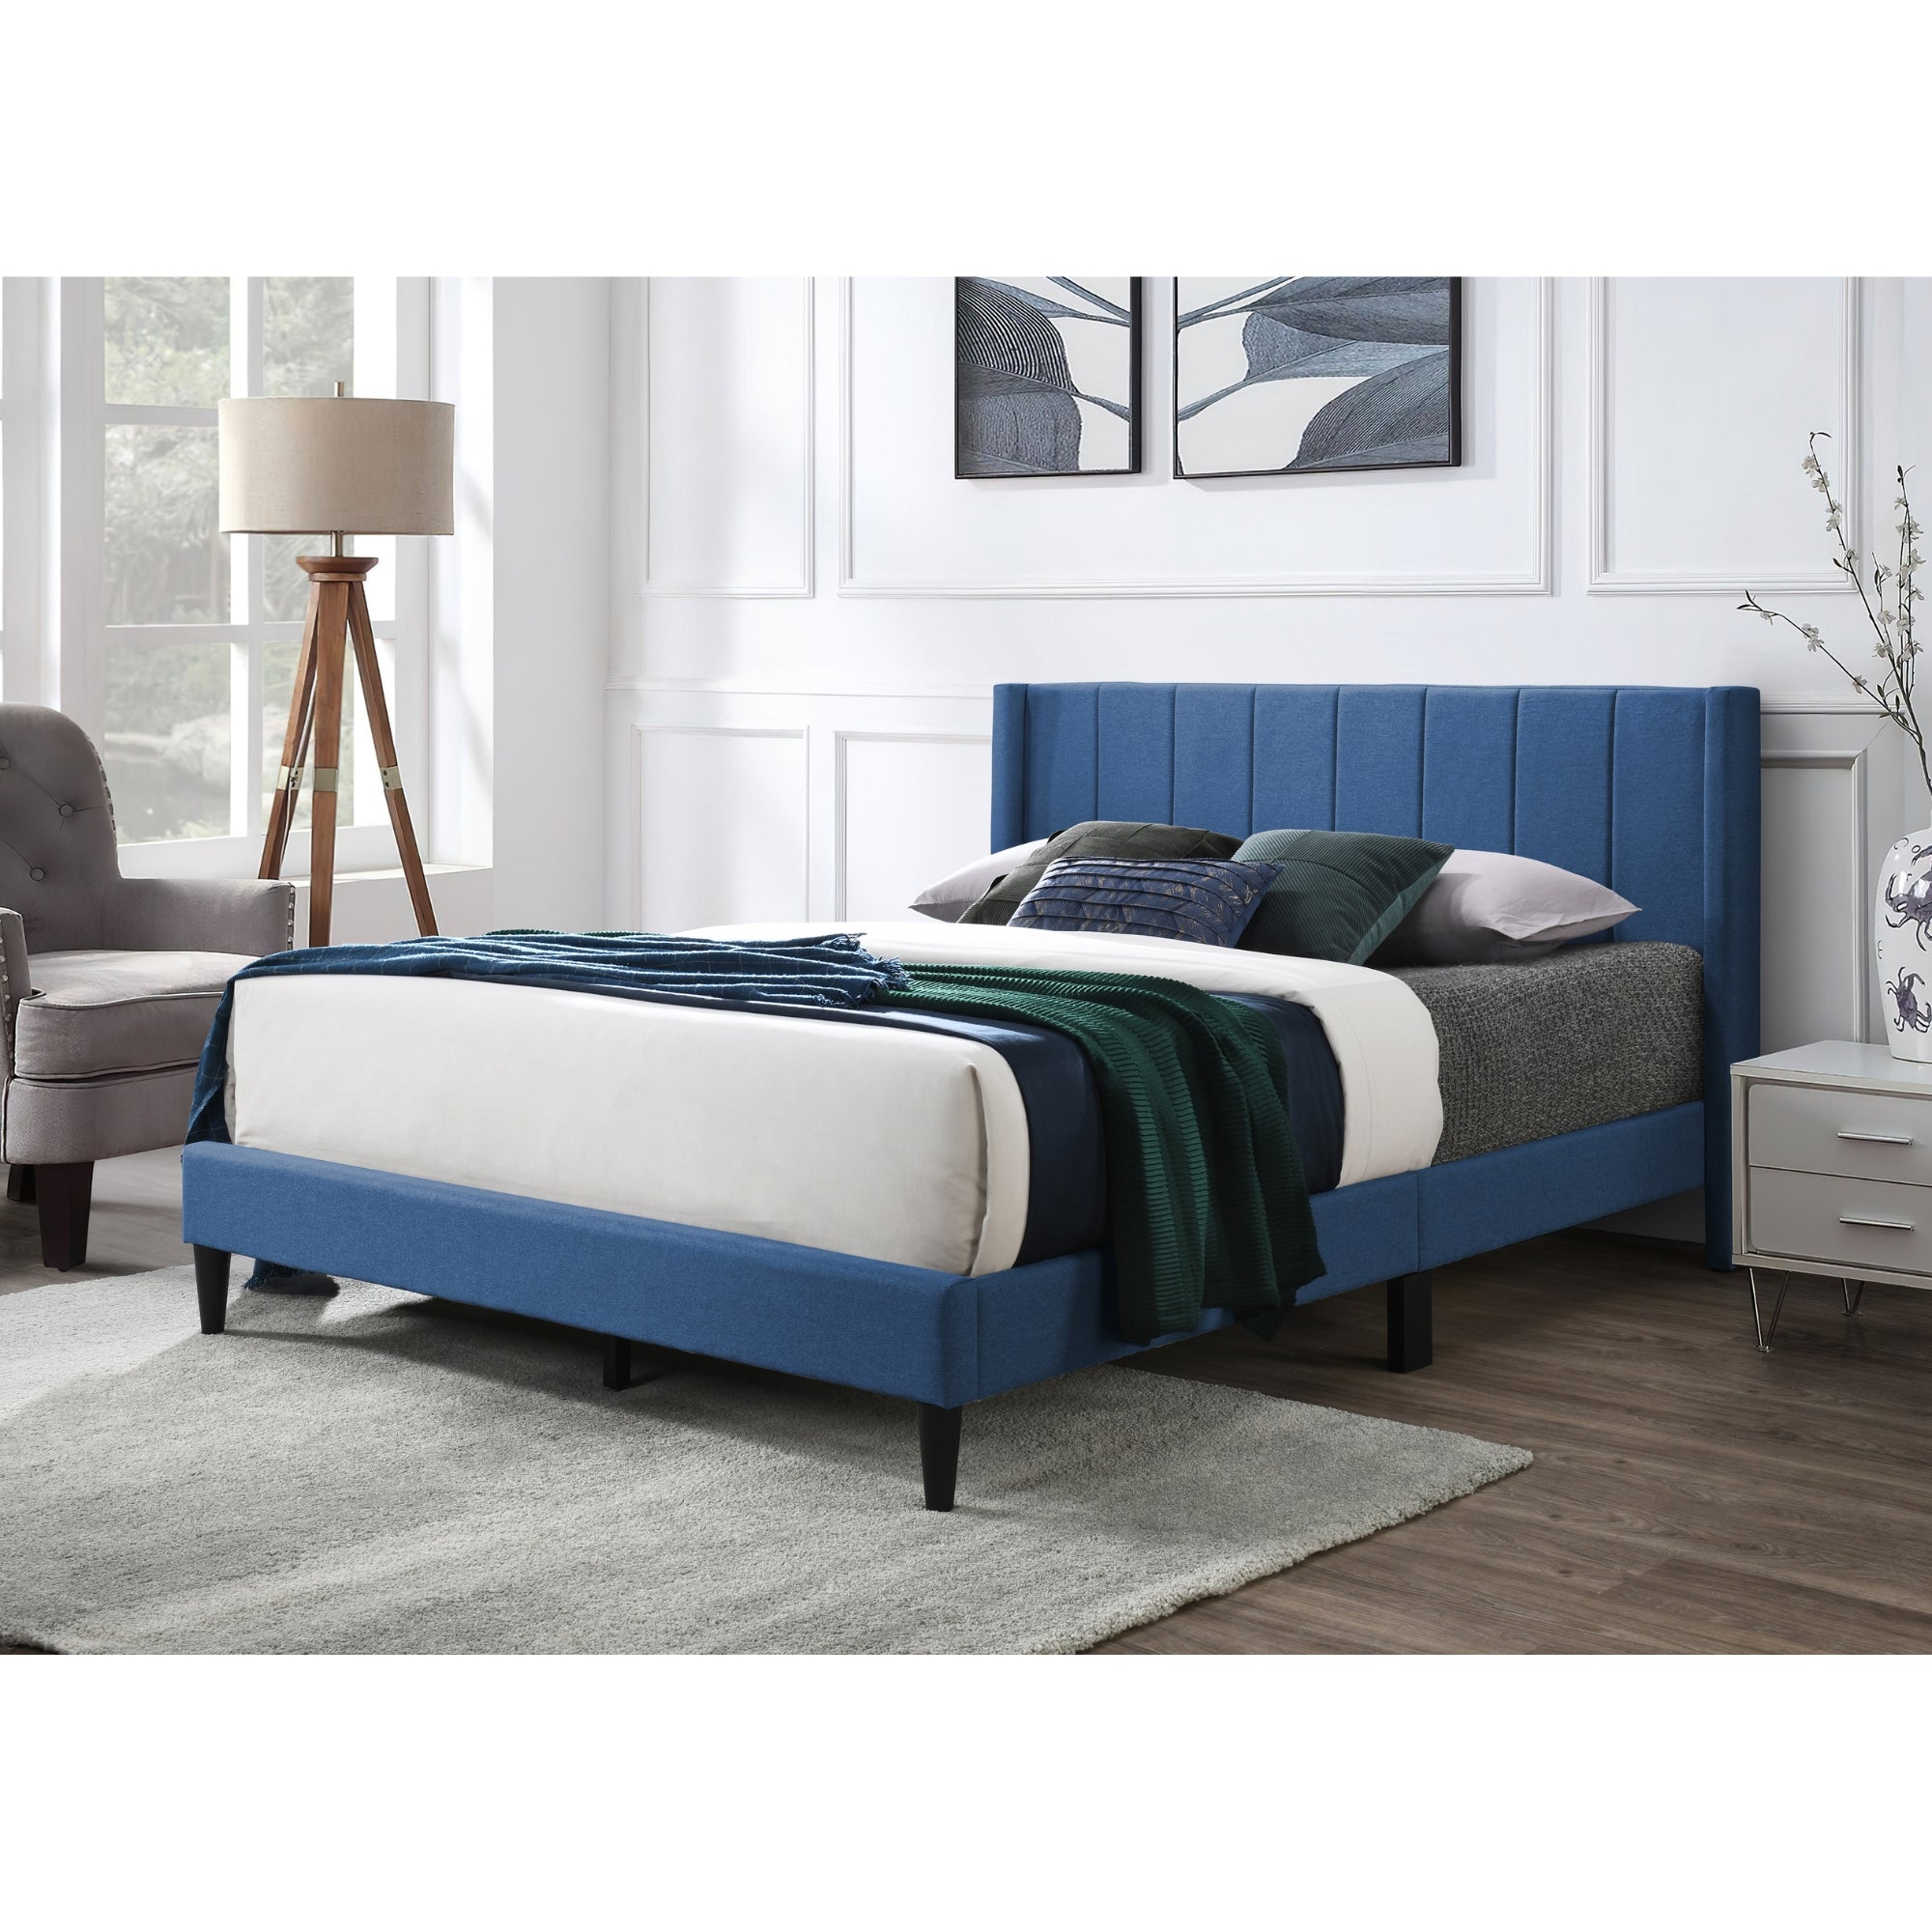 Plush Upholstered Queen Bed w/ Winged Headboard, Blue - Samson